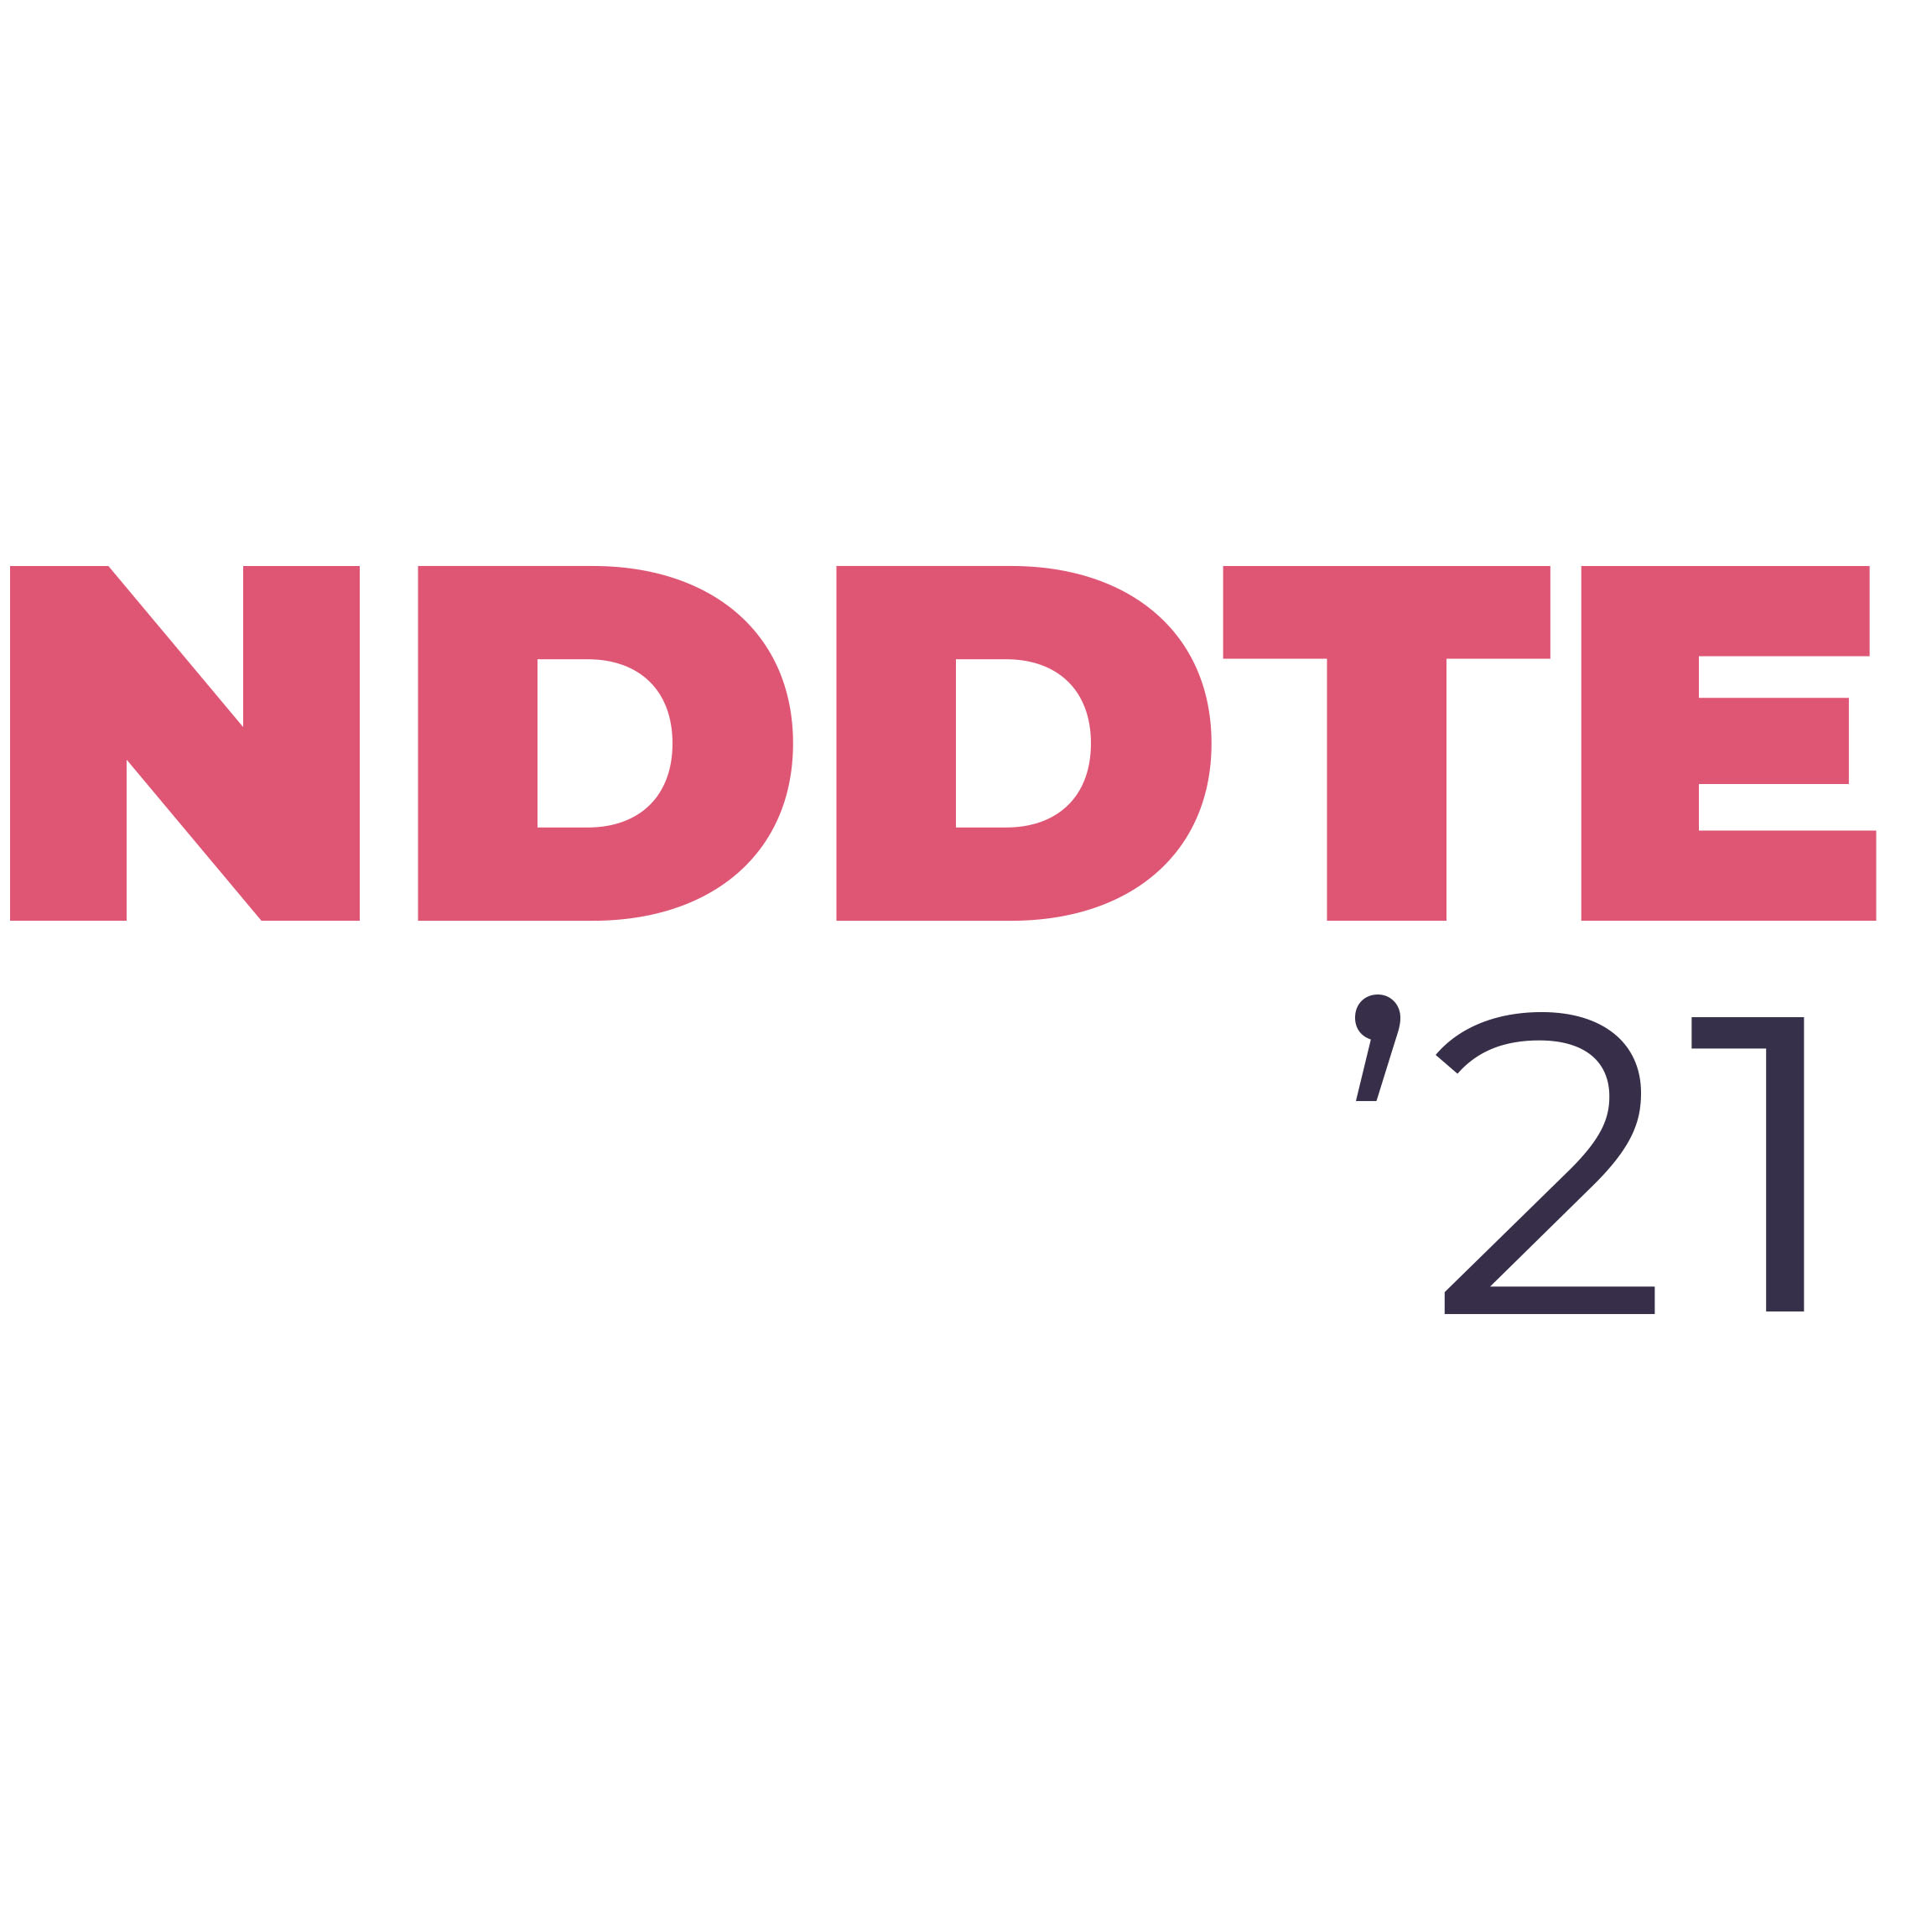 7th International Conference on Nanomedicine, Drug Delivery, and Tissue Engineering (NDDTE’21)